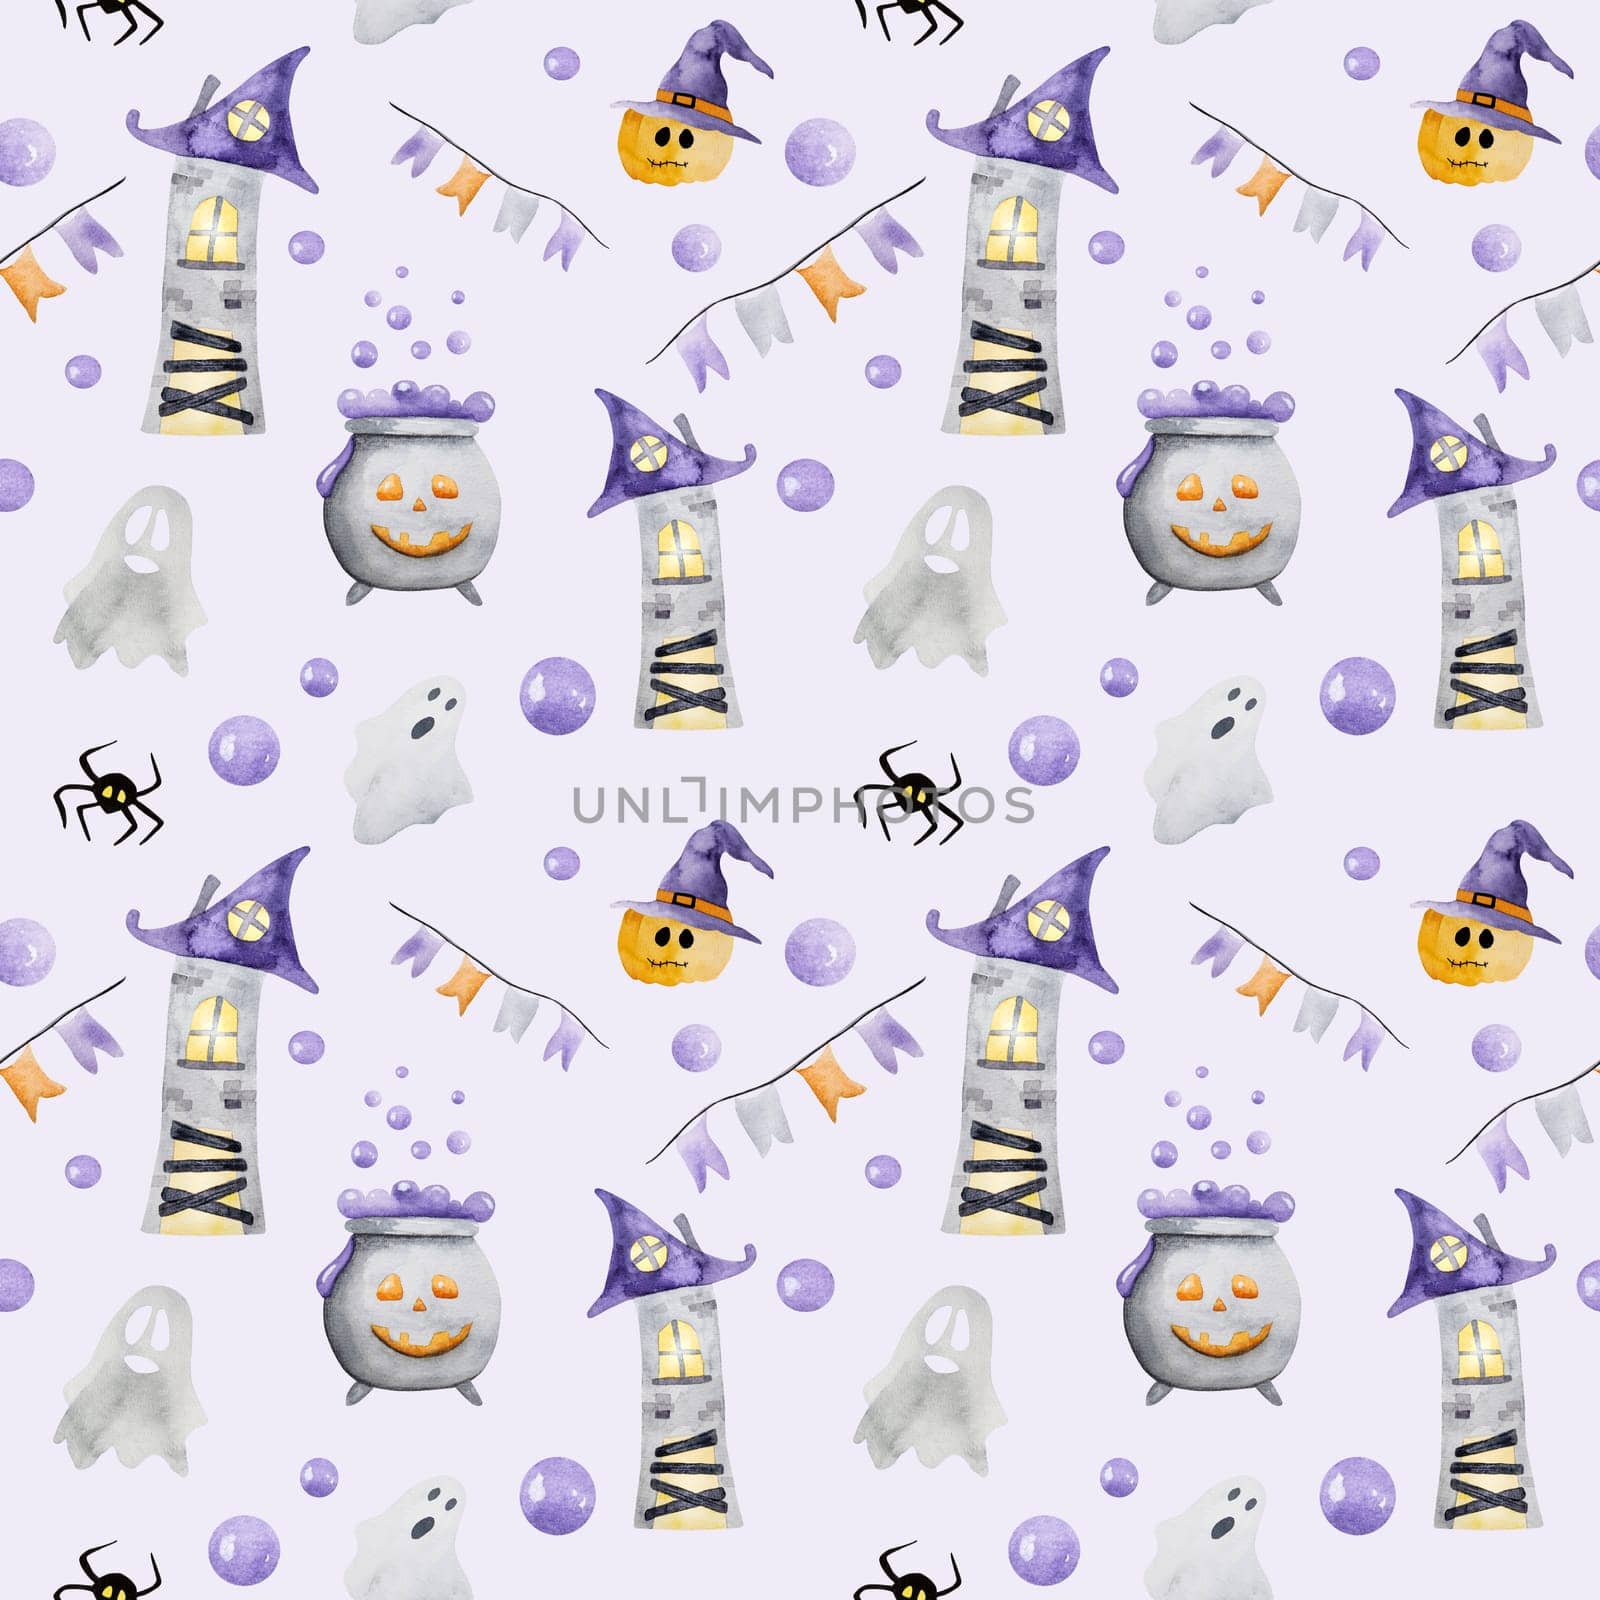 Halloween house with ghost and pumpkin watercolor art seamless pattern. Creepy autumn holiday drawing with mystery home